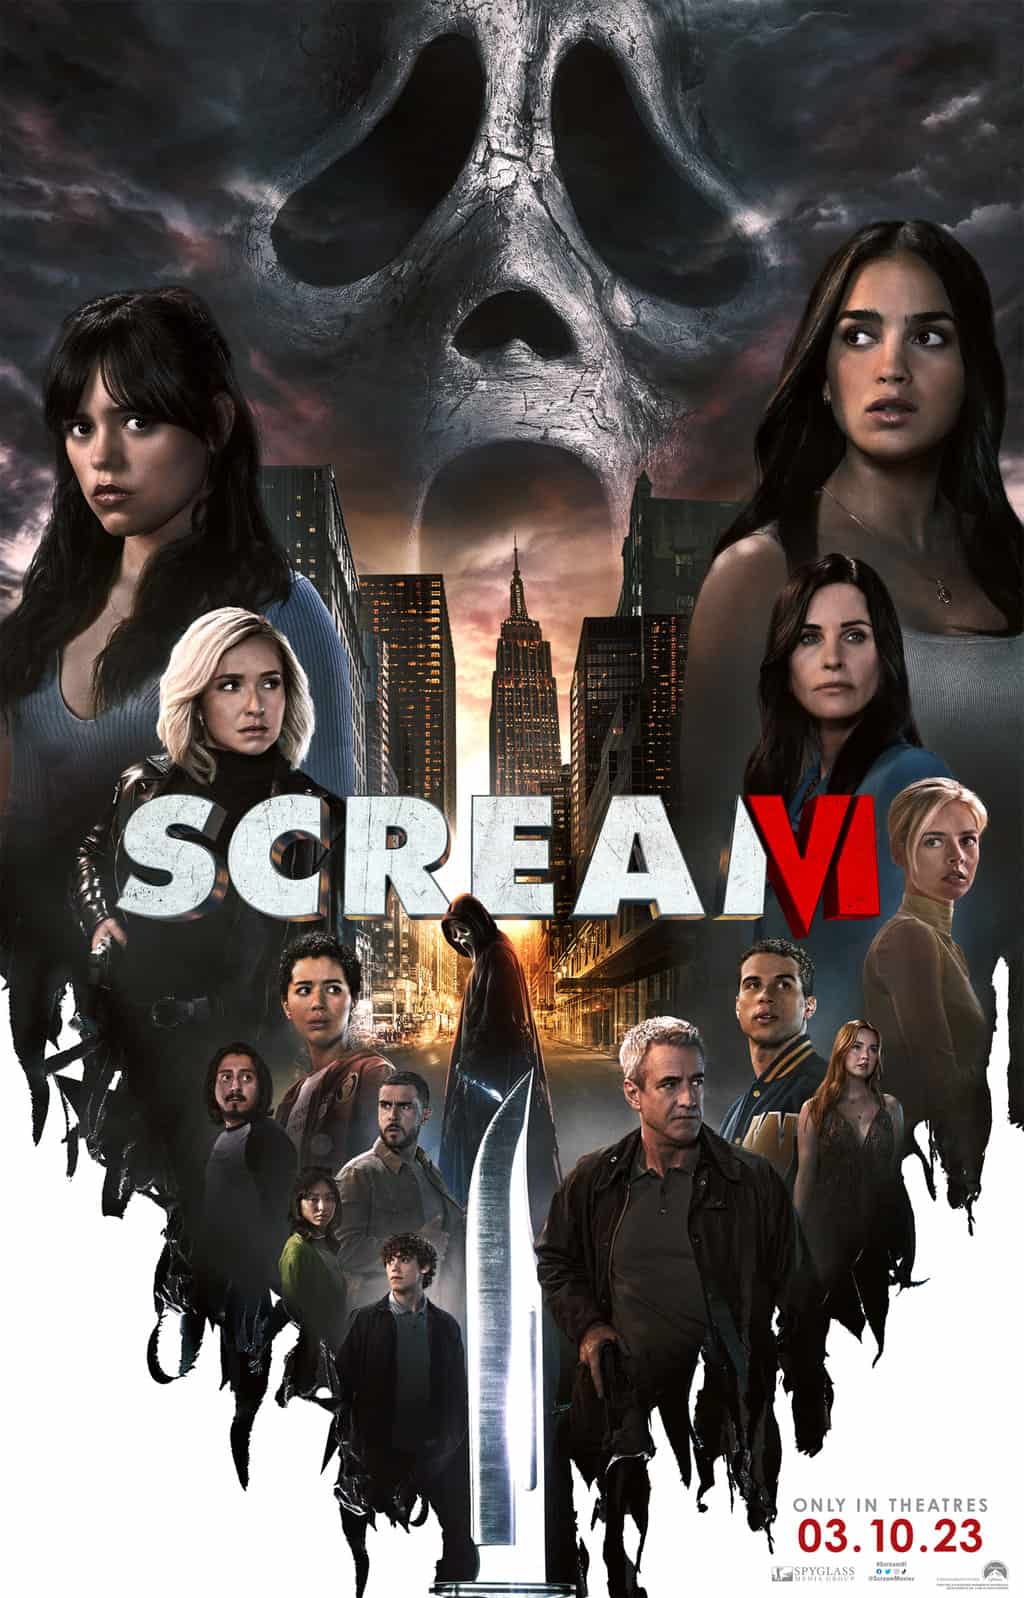 Is there sex scenes in the new scream movie